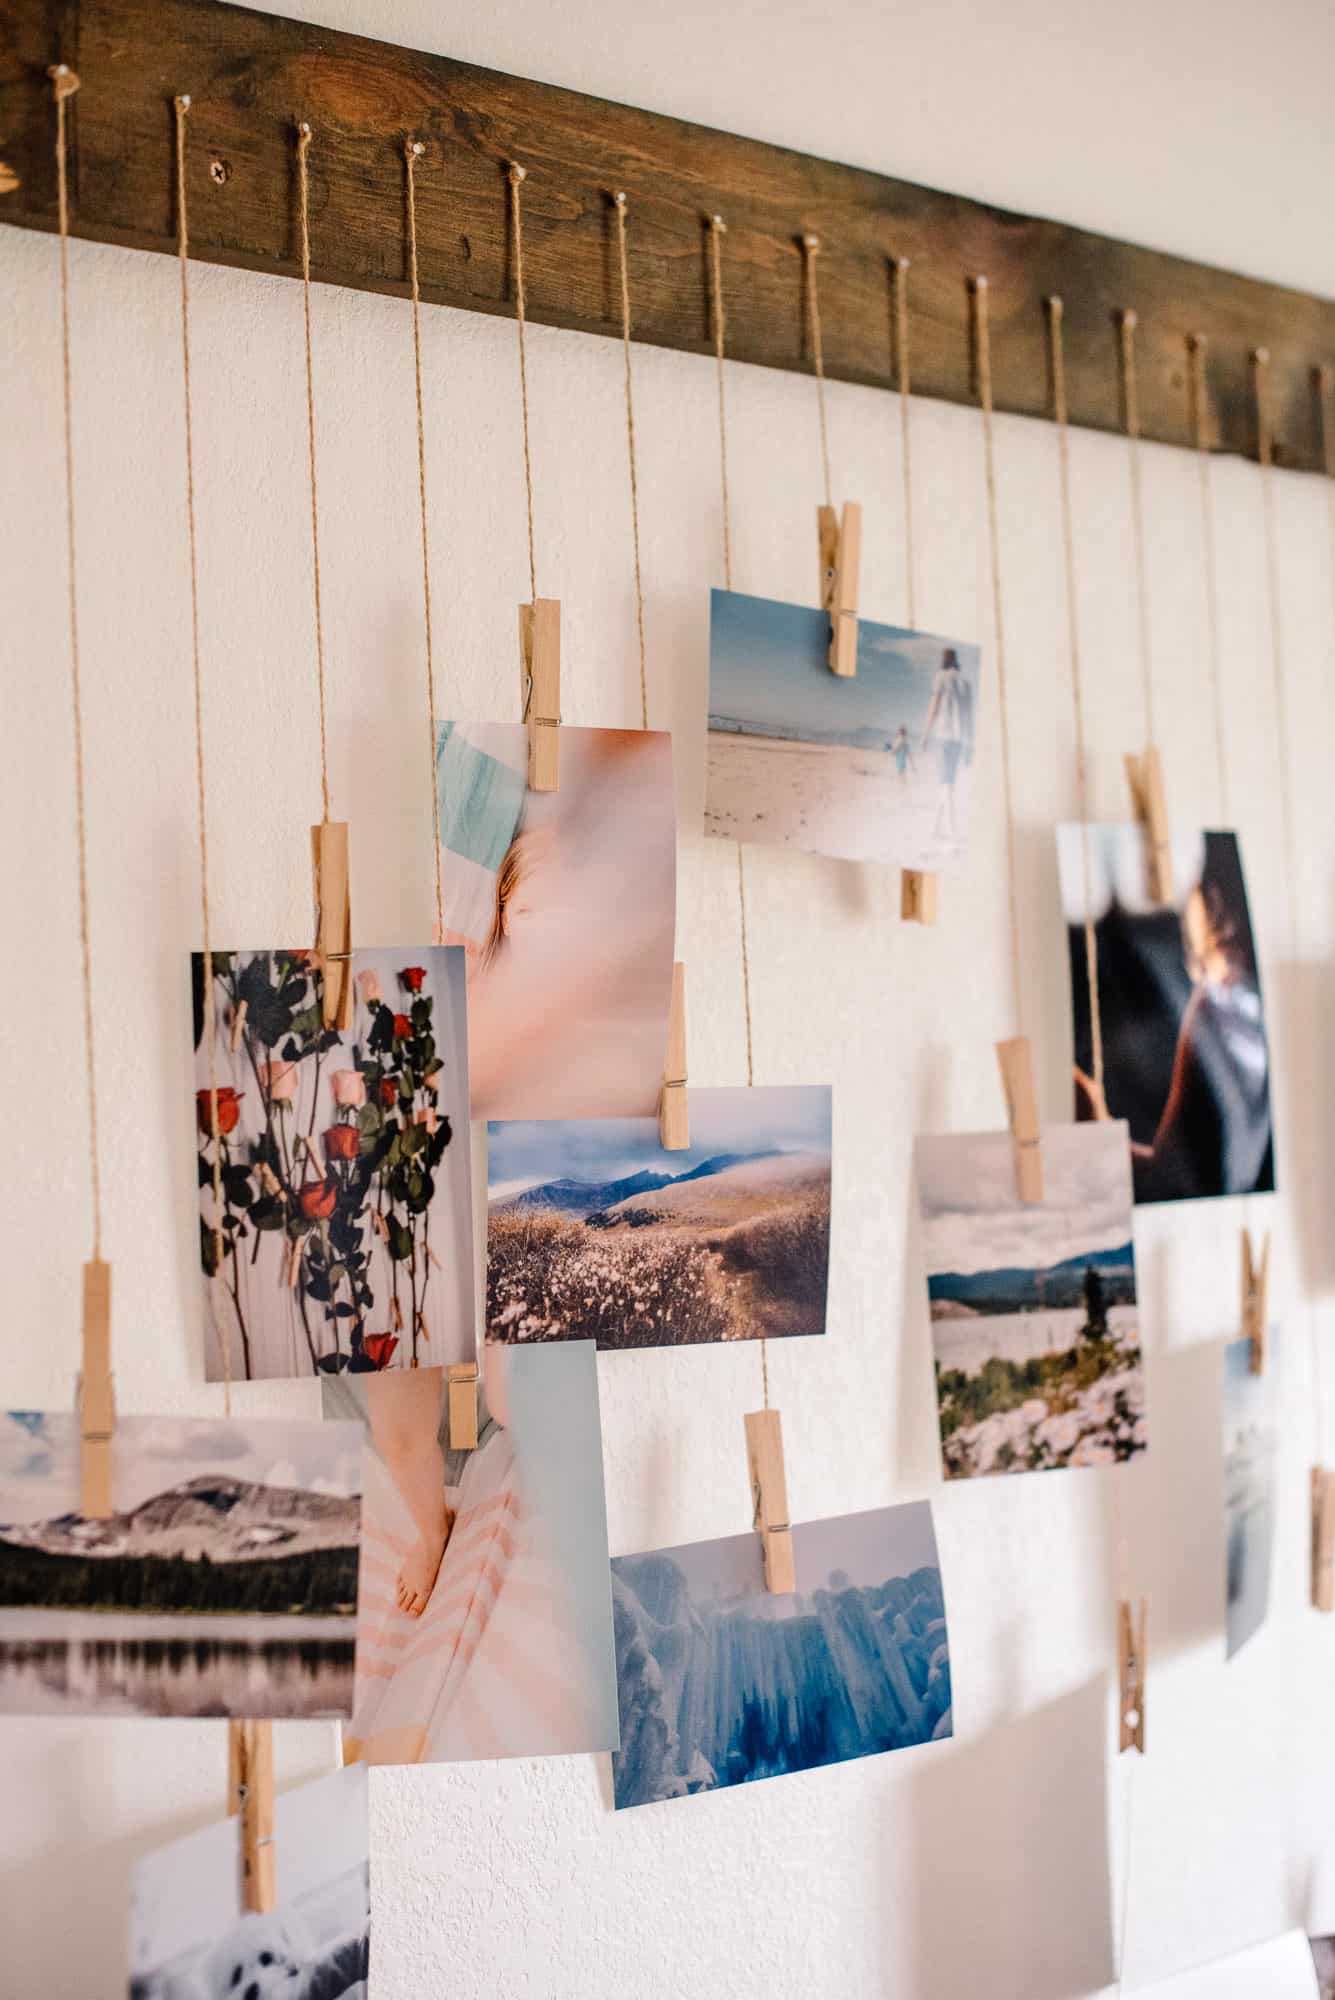 many photos hanging by string clipped on a clothes pin hanging from string on a nail on a wood board